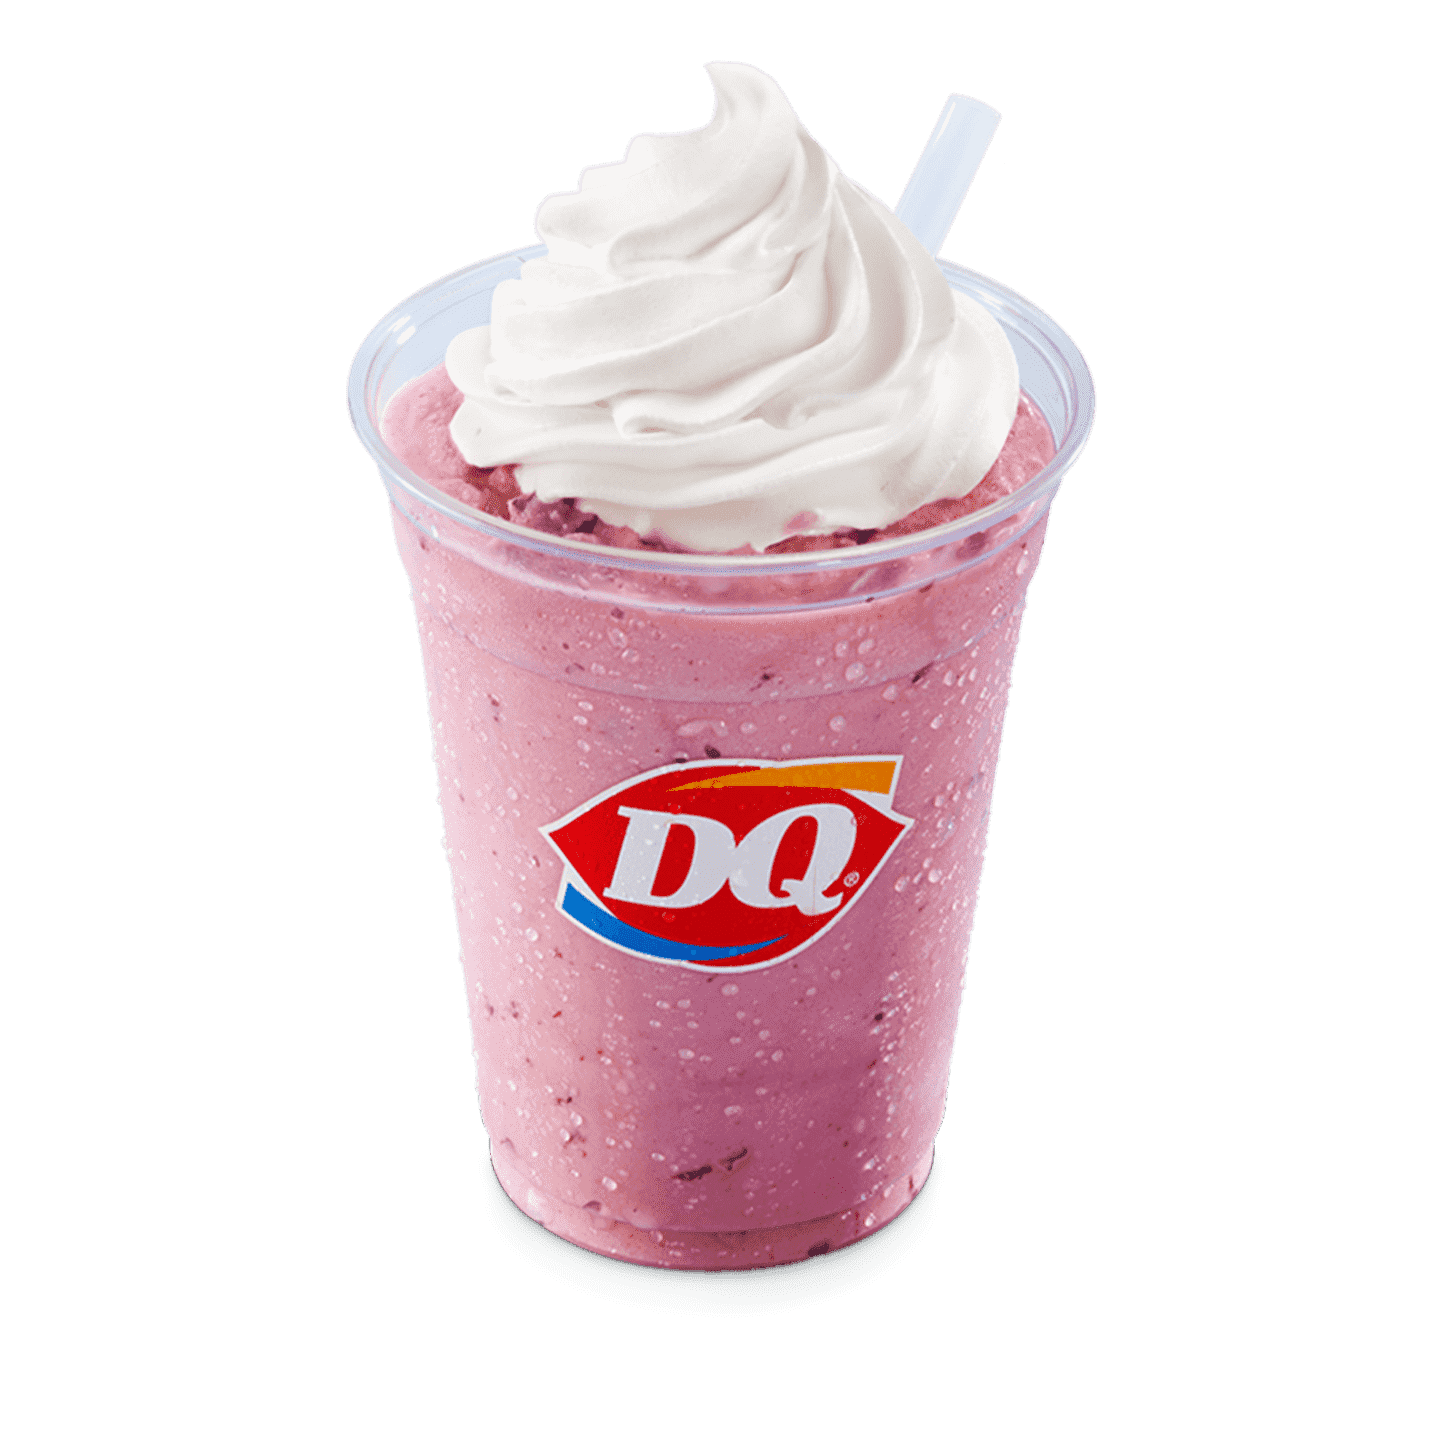 Cherry shake or malt with whipped topping